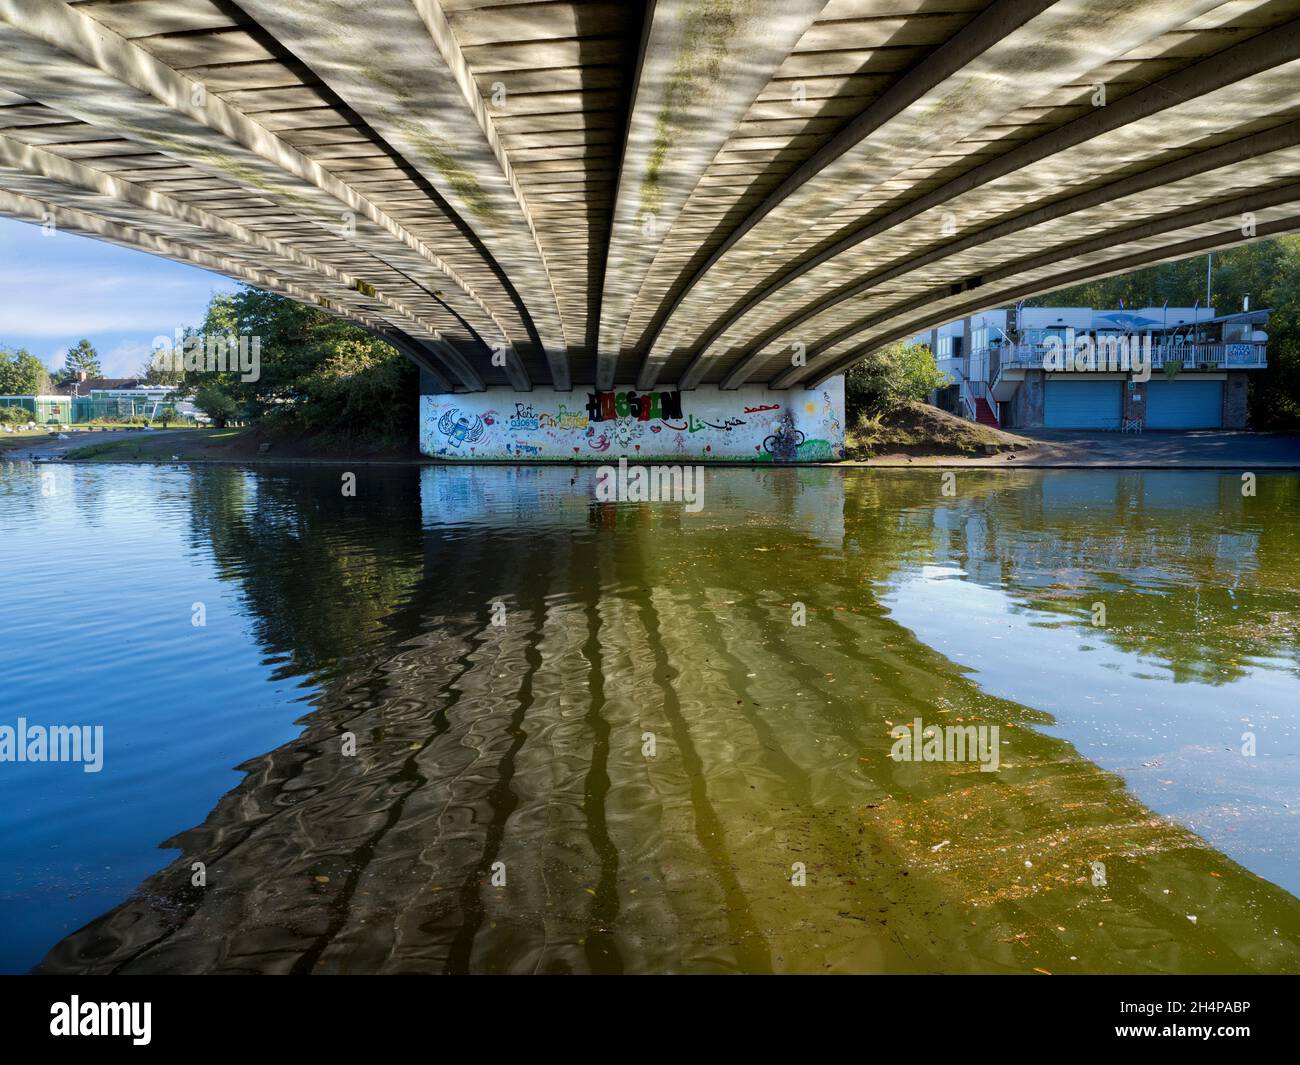 Donnington Bridge crosses the River Thames just upstream of Oxford. Here we see abstract reflections of rippled waters on its underside on a fine Autu Stock Photo